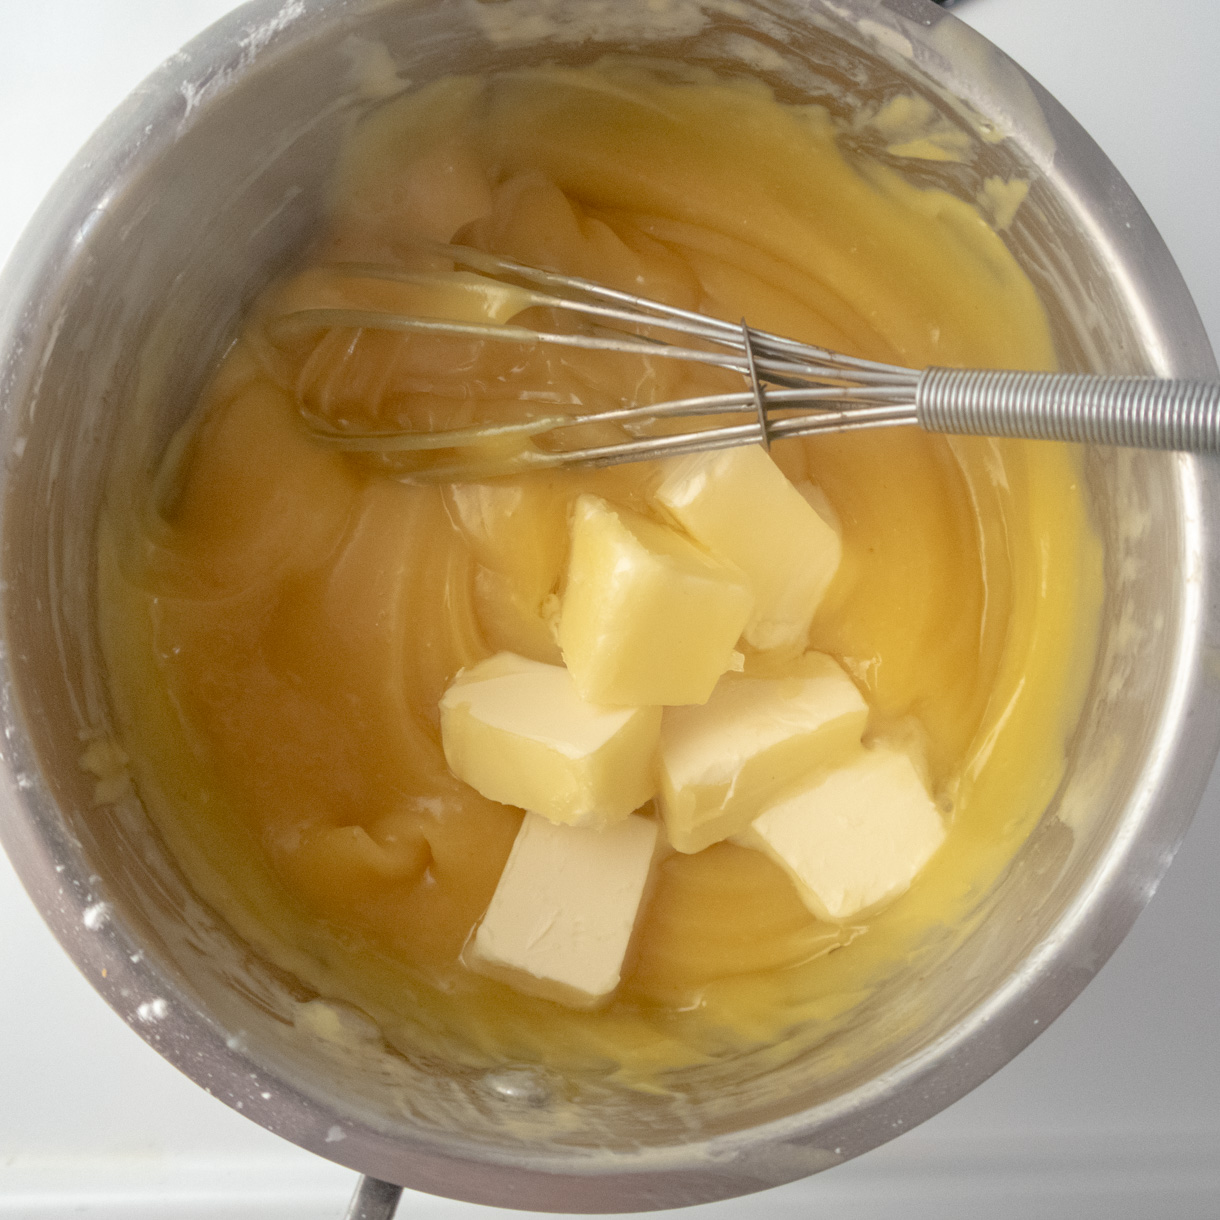 The cooked passionfruit curd in a saucepan with the vegan butter cubes being incorporated.